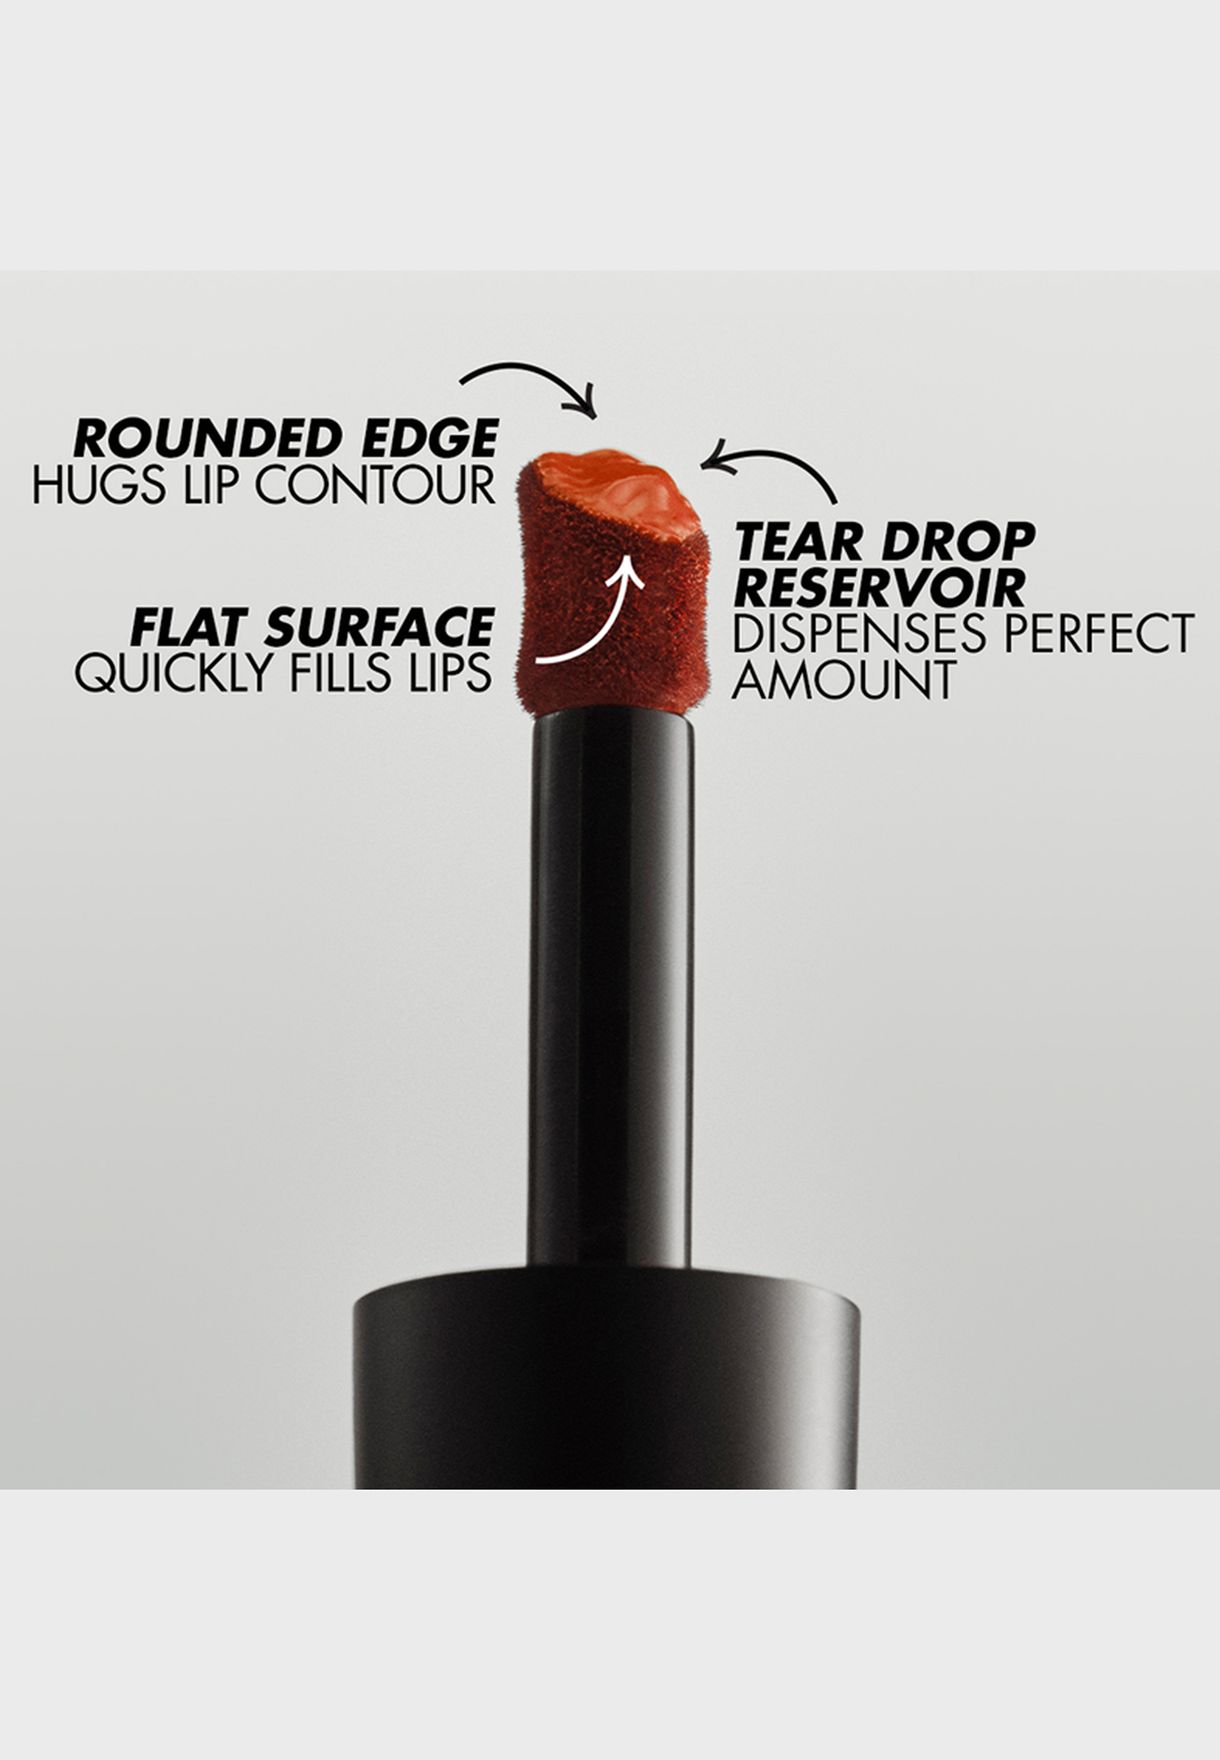 Rouge Artist For Ever Matte Lipstick - 194 - Immortal Rosewood